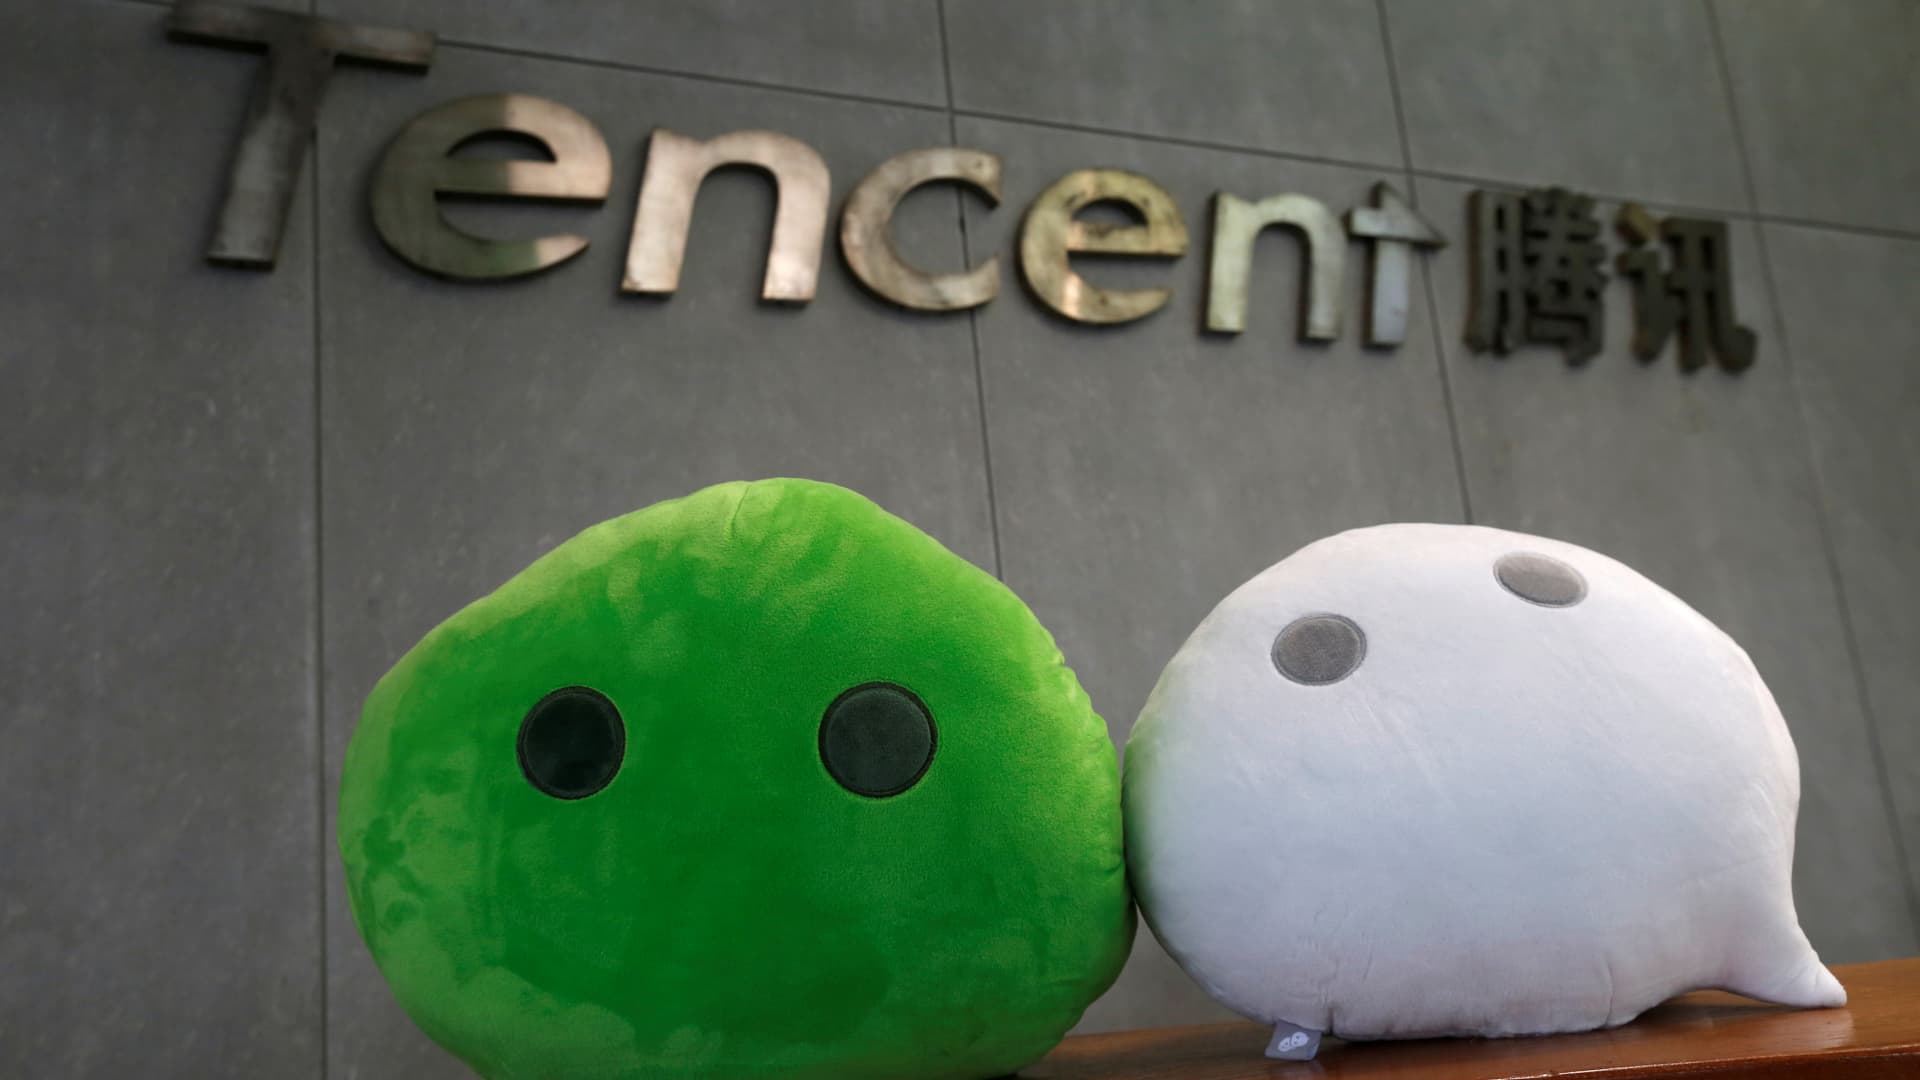 Tencent, the $370 billion Chinese tech giant, posts first ever revenue decline - CNBC - Tranquility 國際社群